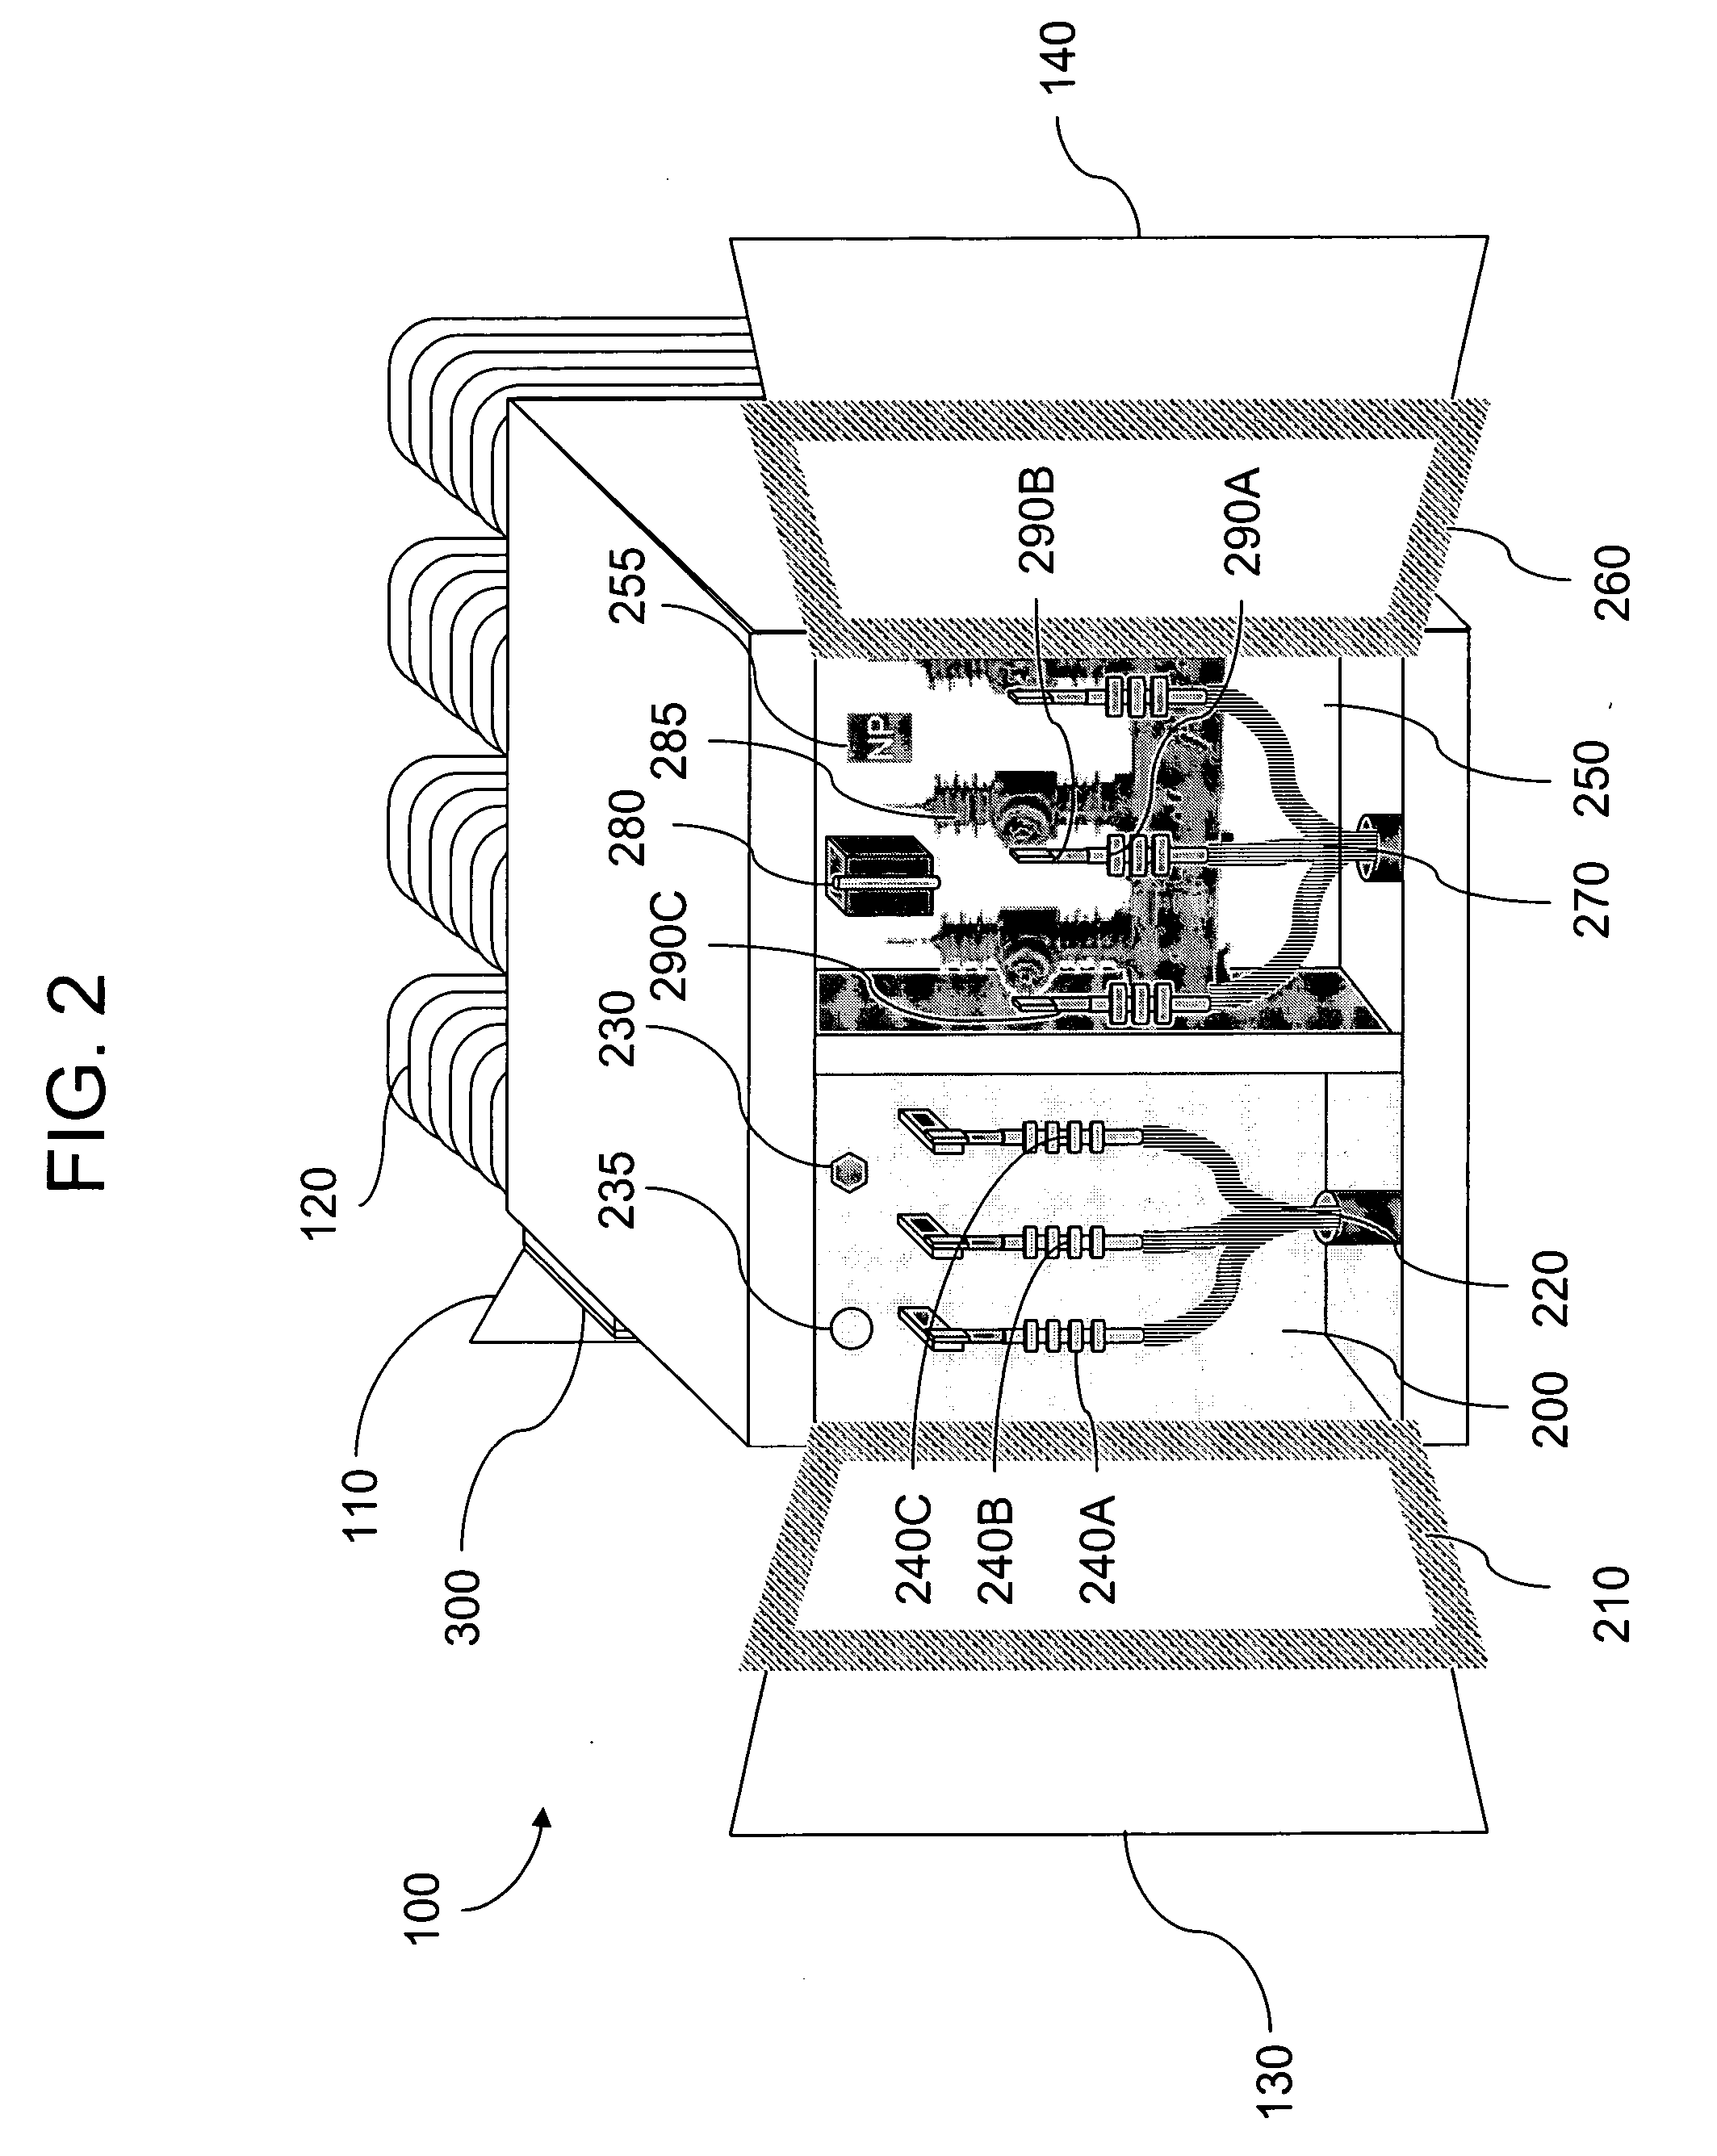 Multi-compartmental transformer and methods of maintenance therefor